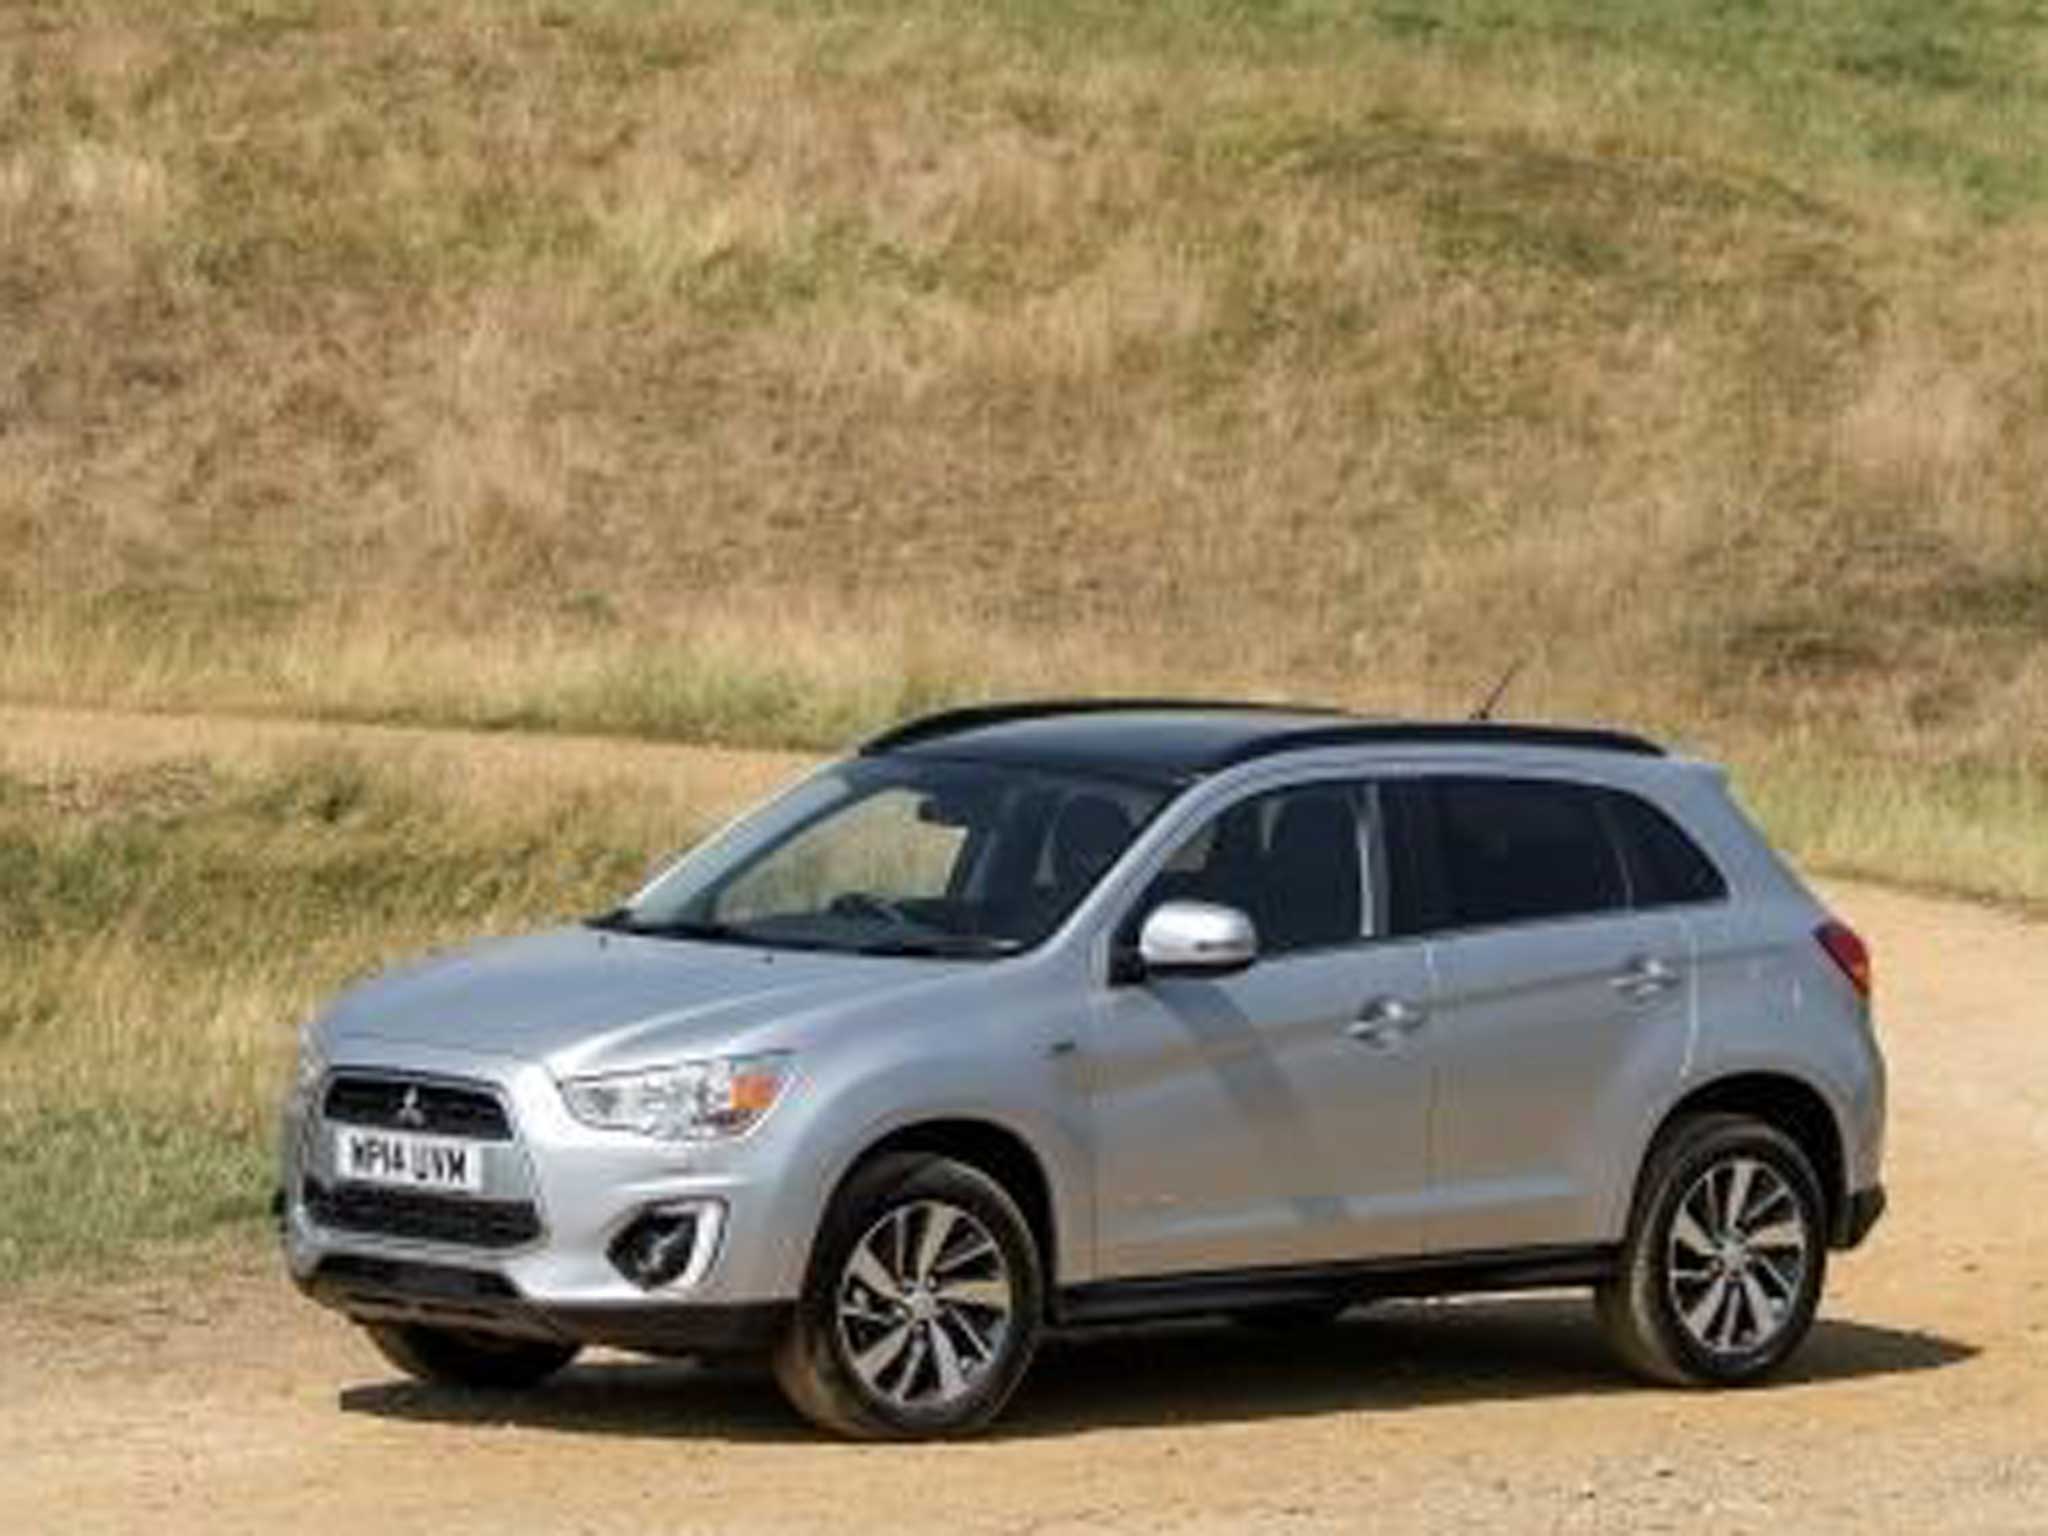 Mitsubishi ASX ZC-H has tidy handling, thanks in part to its relatively sophisticated suspension set-up